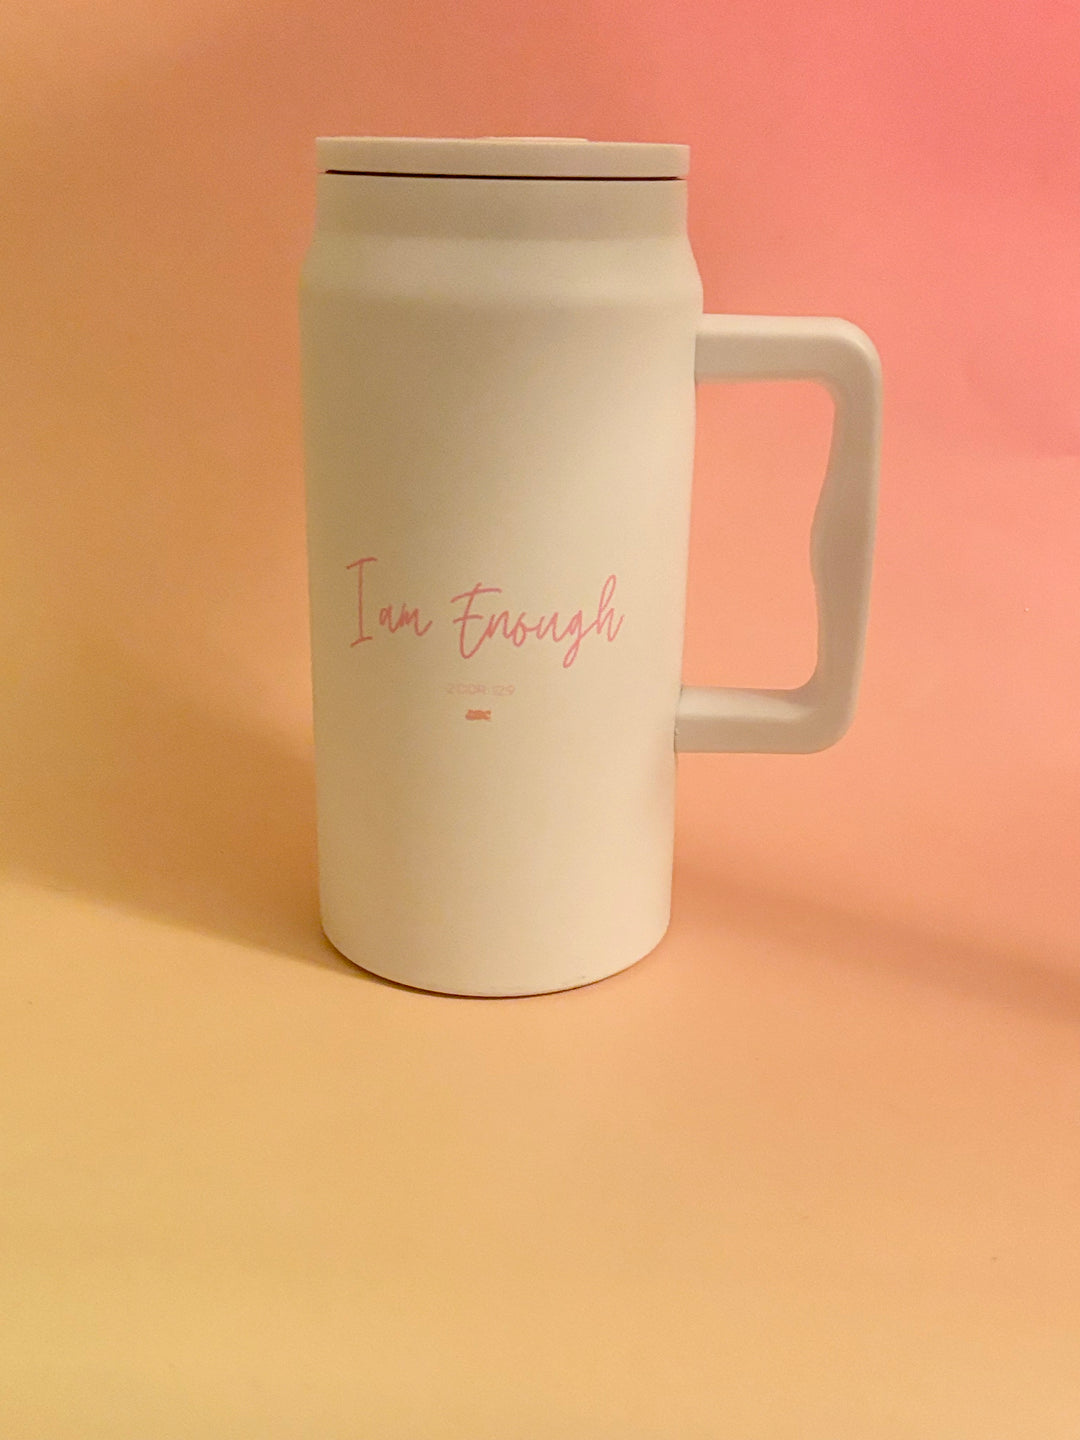 I am enough stainless steel tumbler